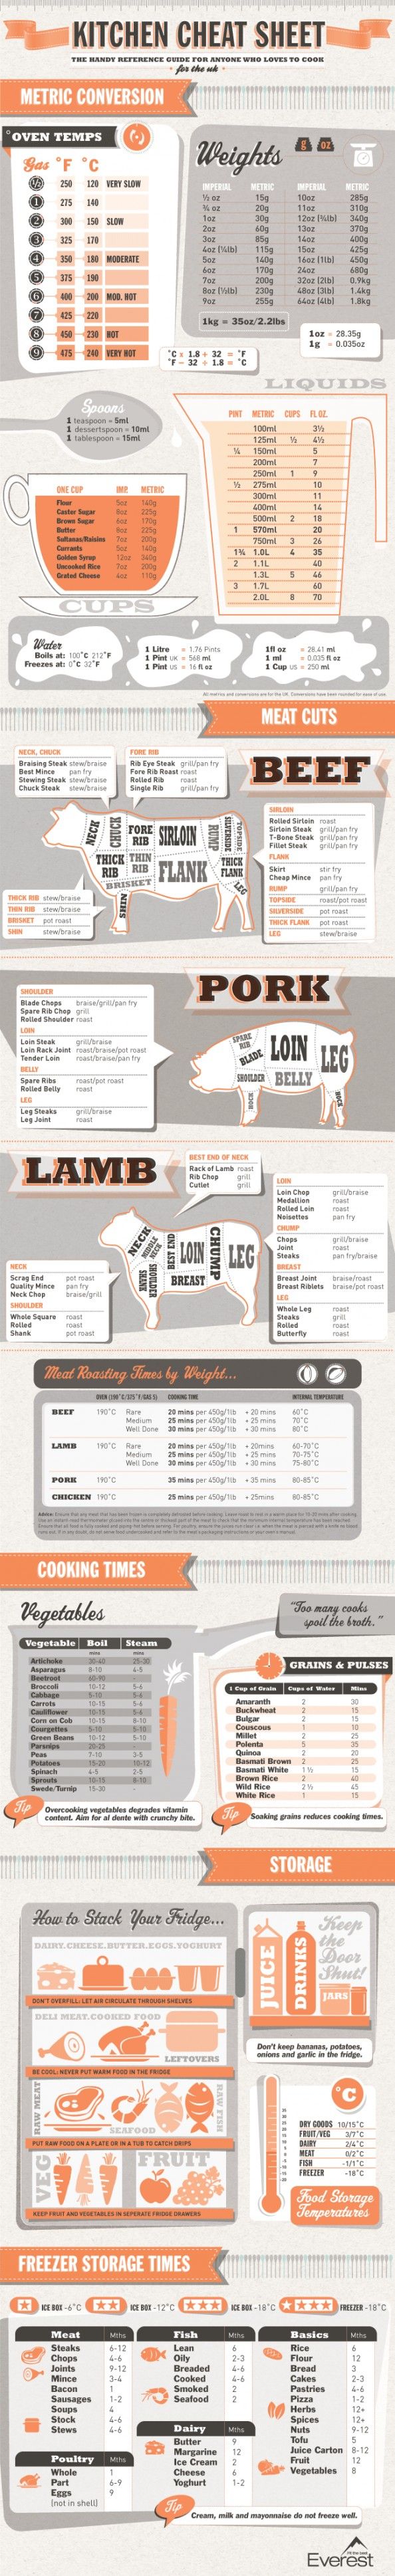 The Ultimate Kitchen Cheat Sheet (Infographic)